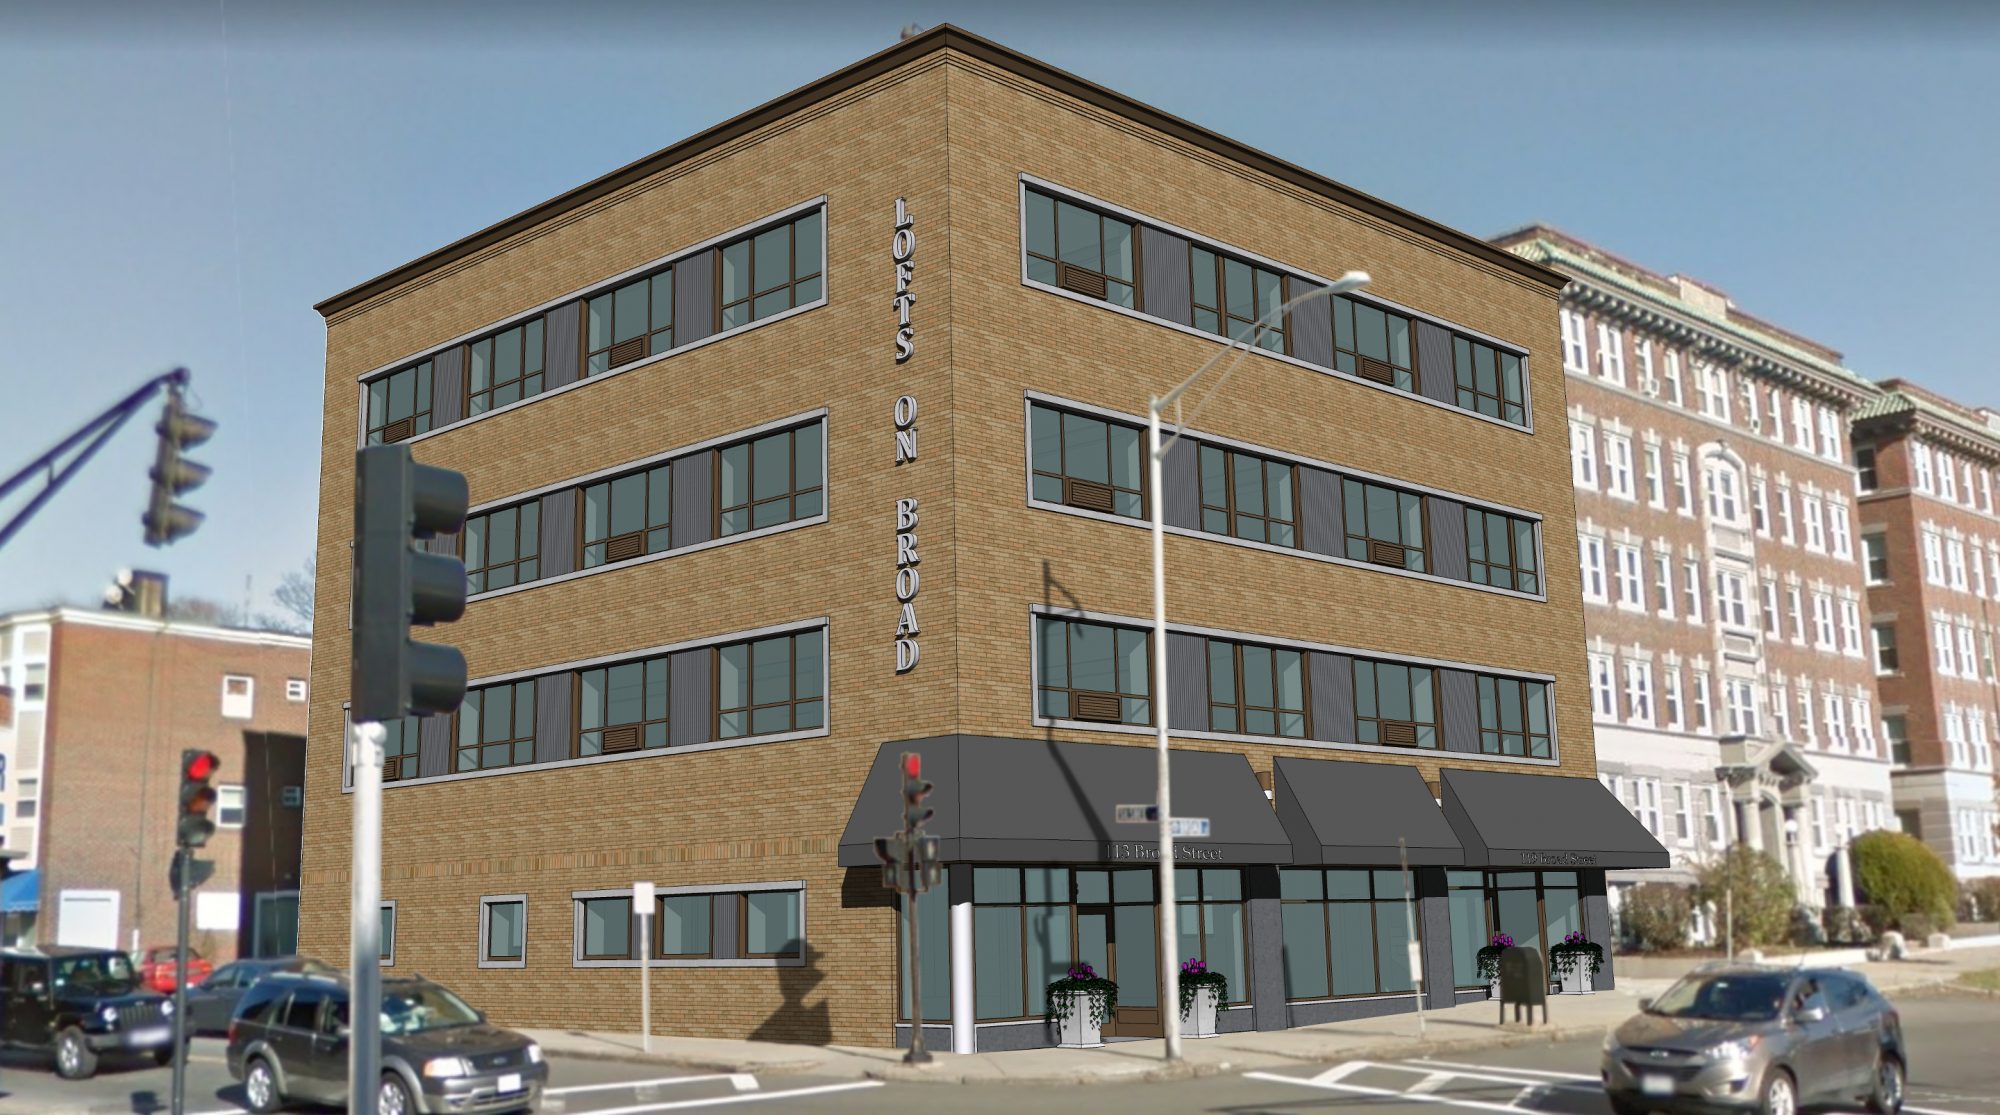 An artist's rendering of the planned development of the 113-119 Broad Street building in Lynn.